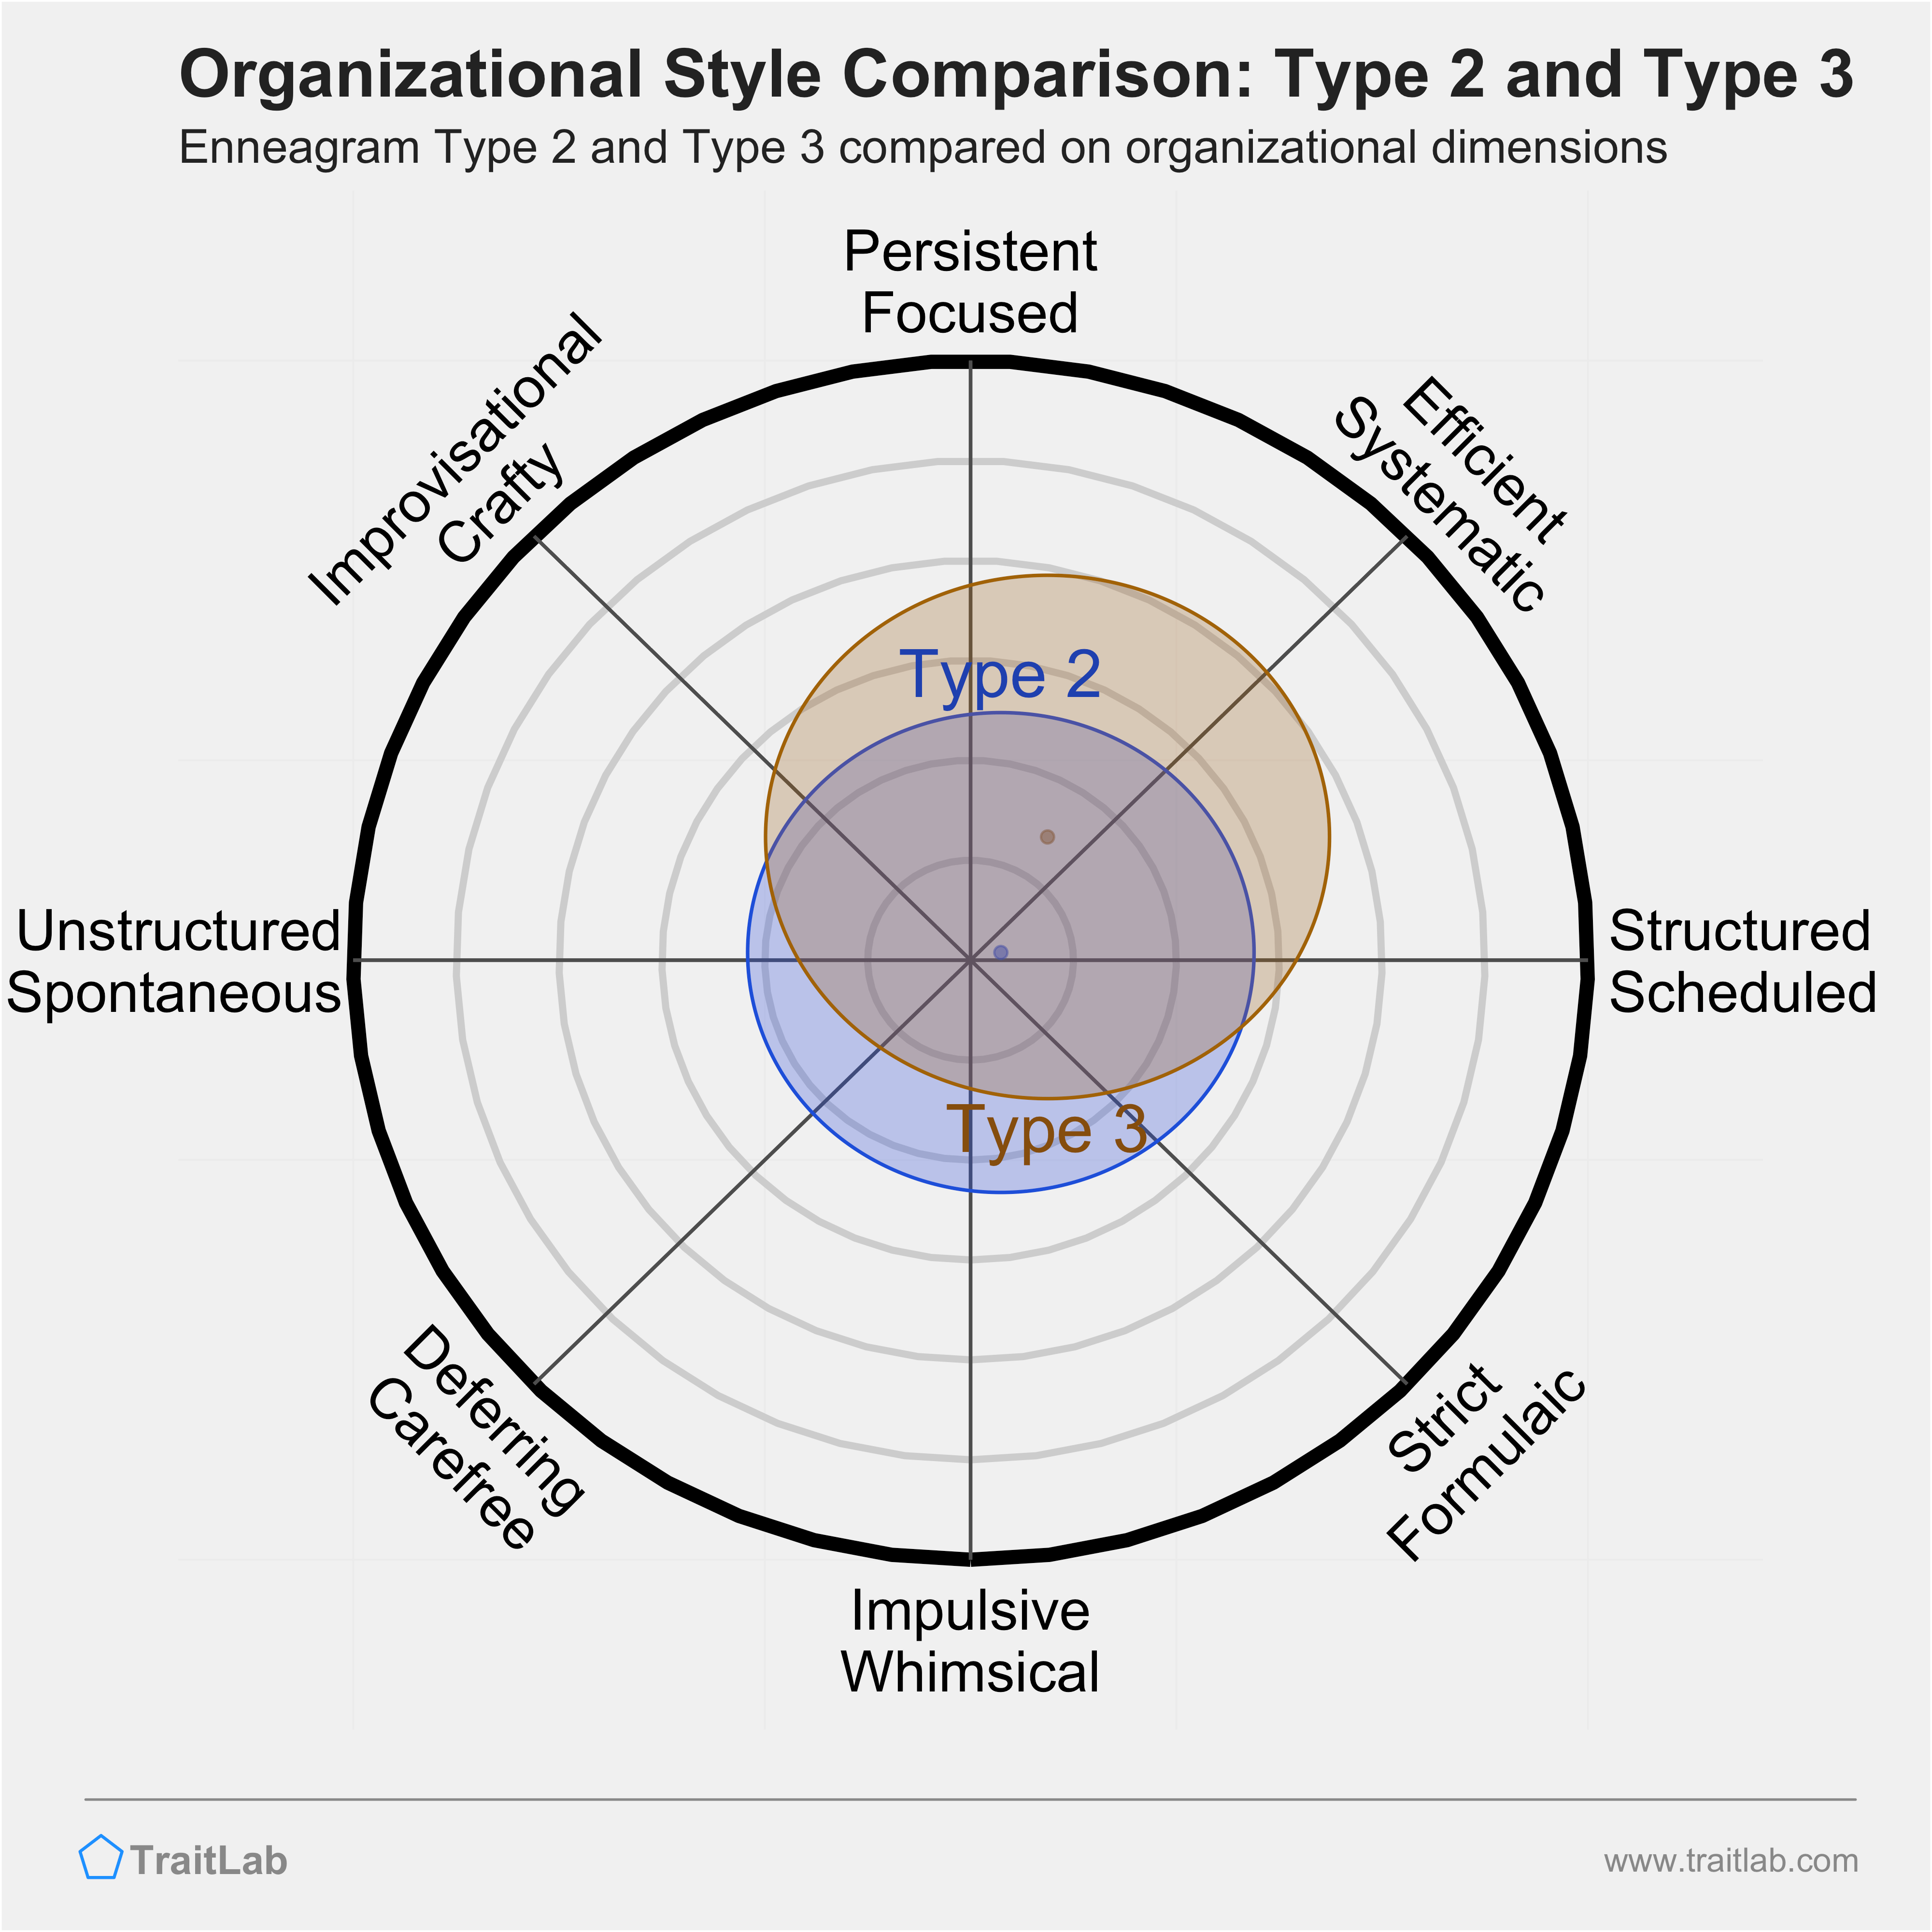 Type 2 and Type 3 comparison across organizational dimensions